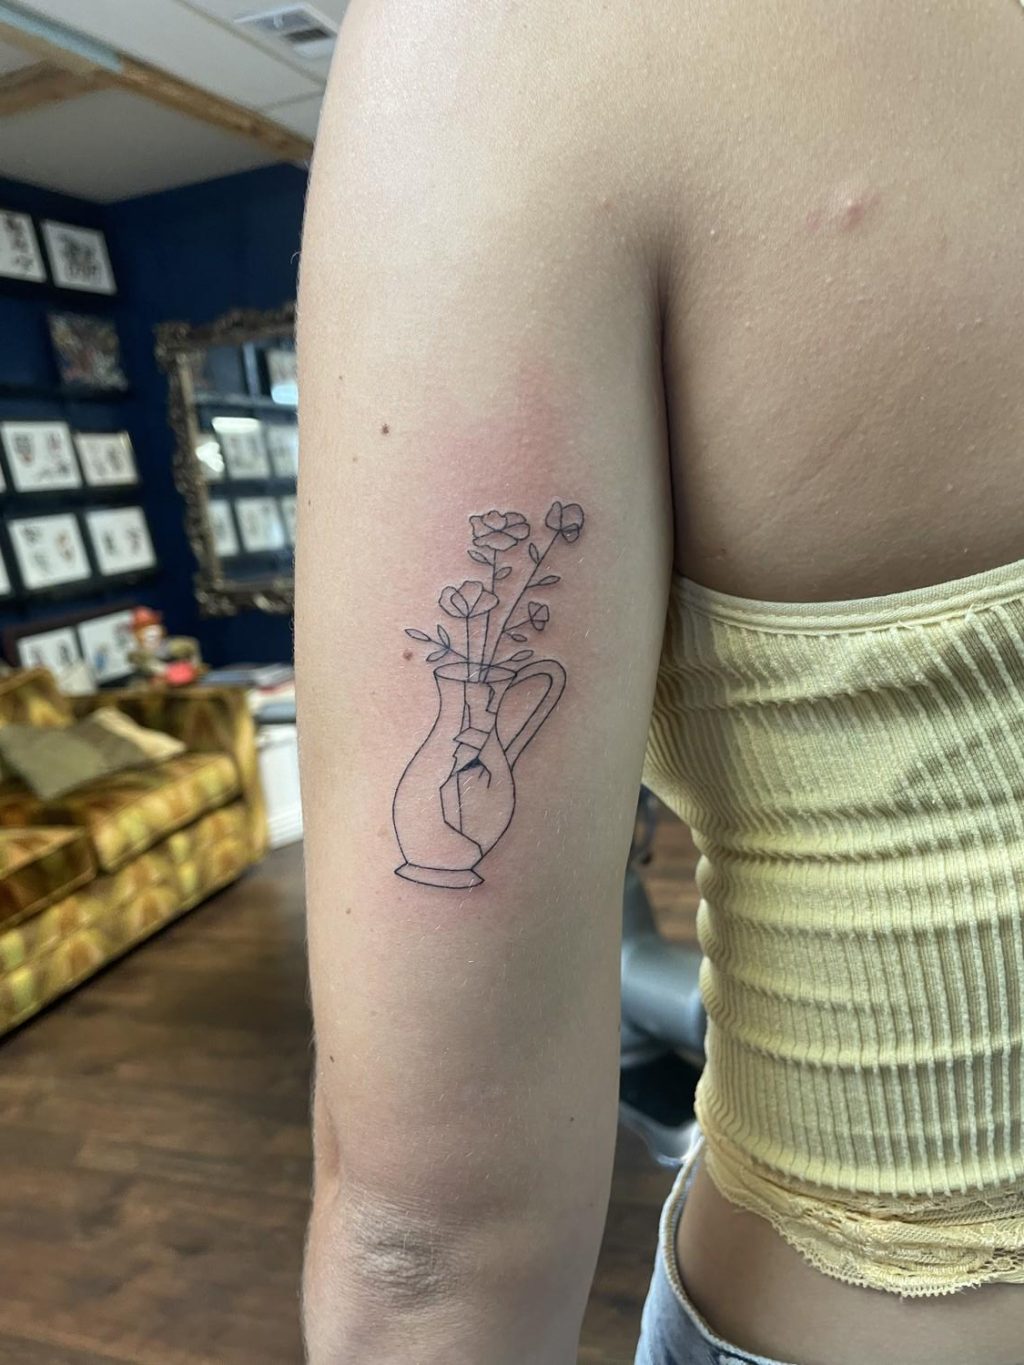 Senior Isabella Joiner's tattoo of a cracked vase holding flowers sits on the back of her left arm Aug. 5, in Fort Walton, Florida. Joiner said this was her first tattoo, and she had been wanting one since she was 18. Photo courtesy of Isabella Joiner